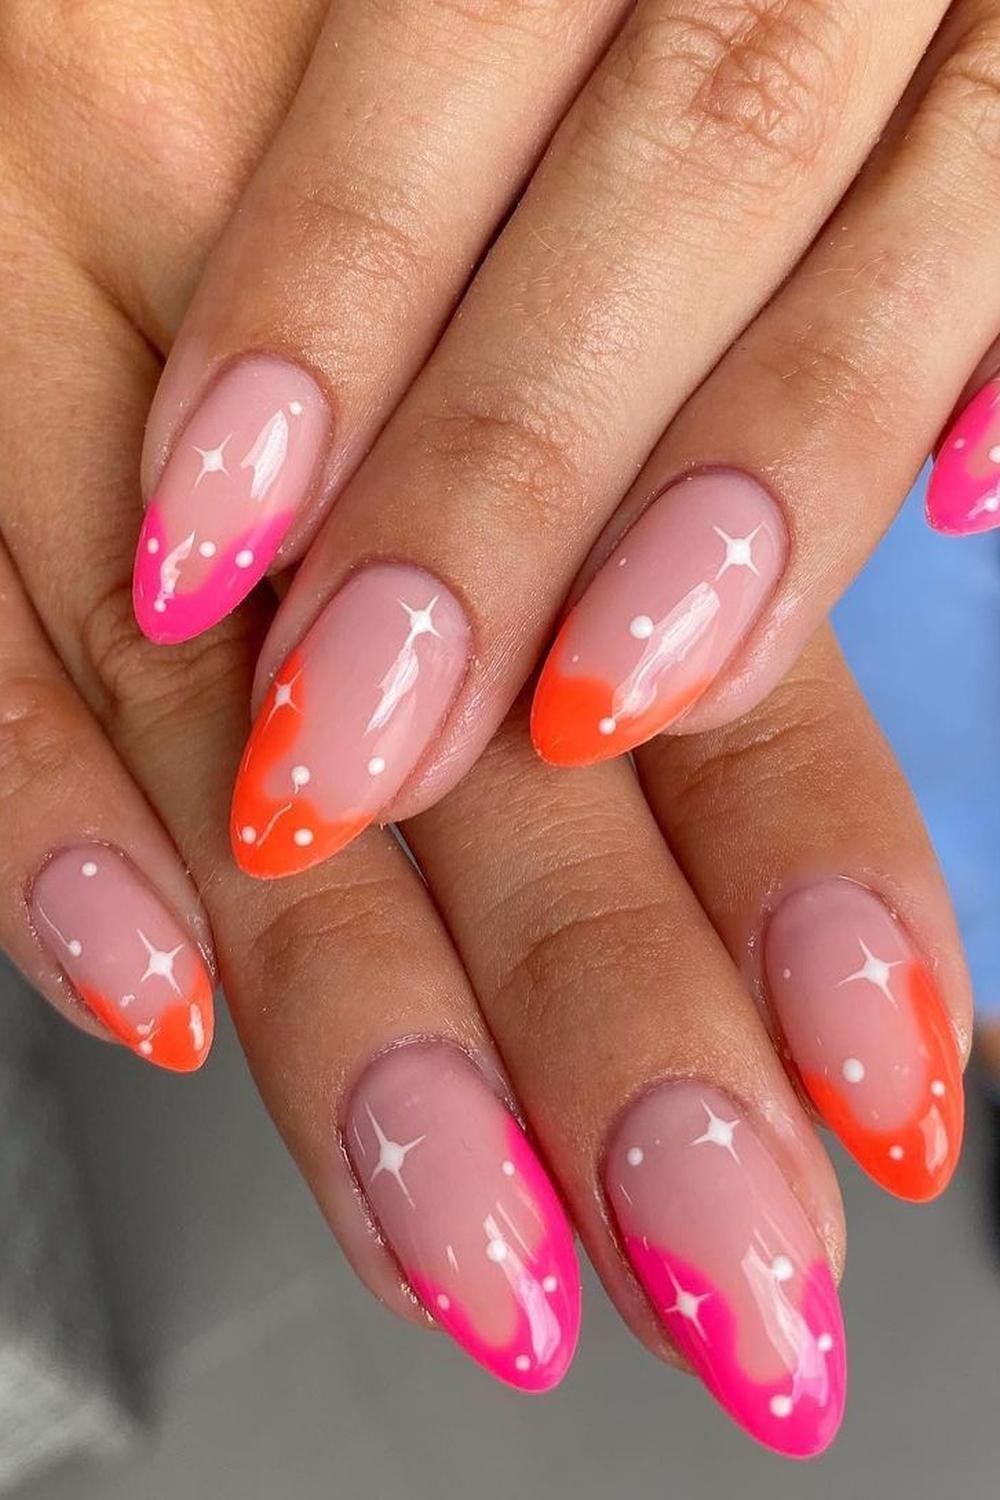 28 - Picture of Pink and Orange Nails